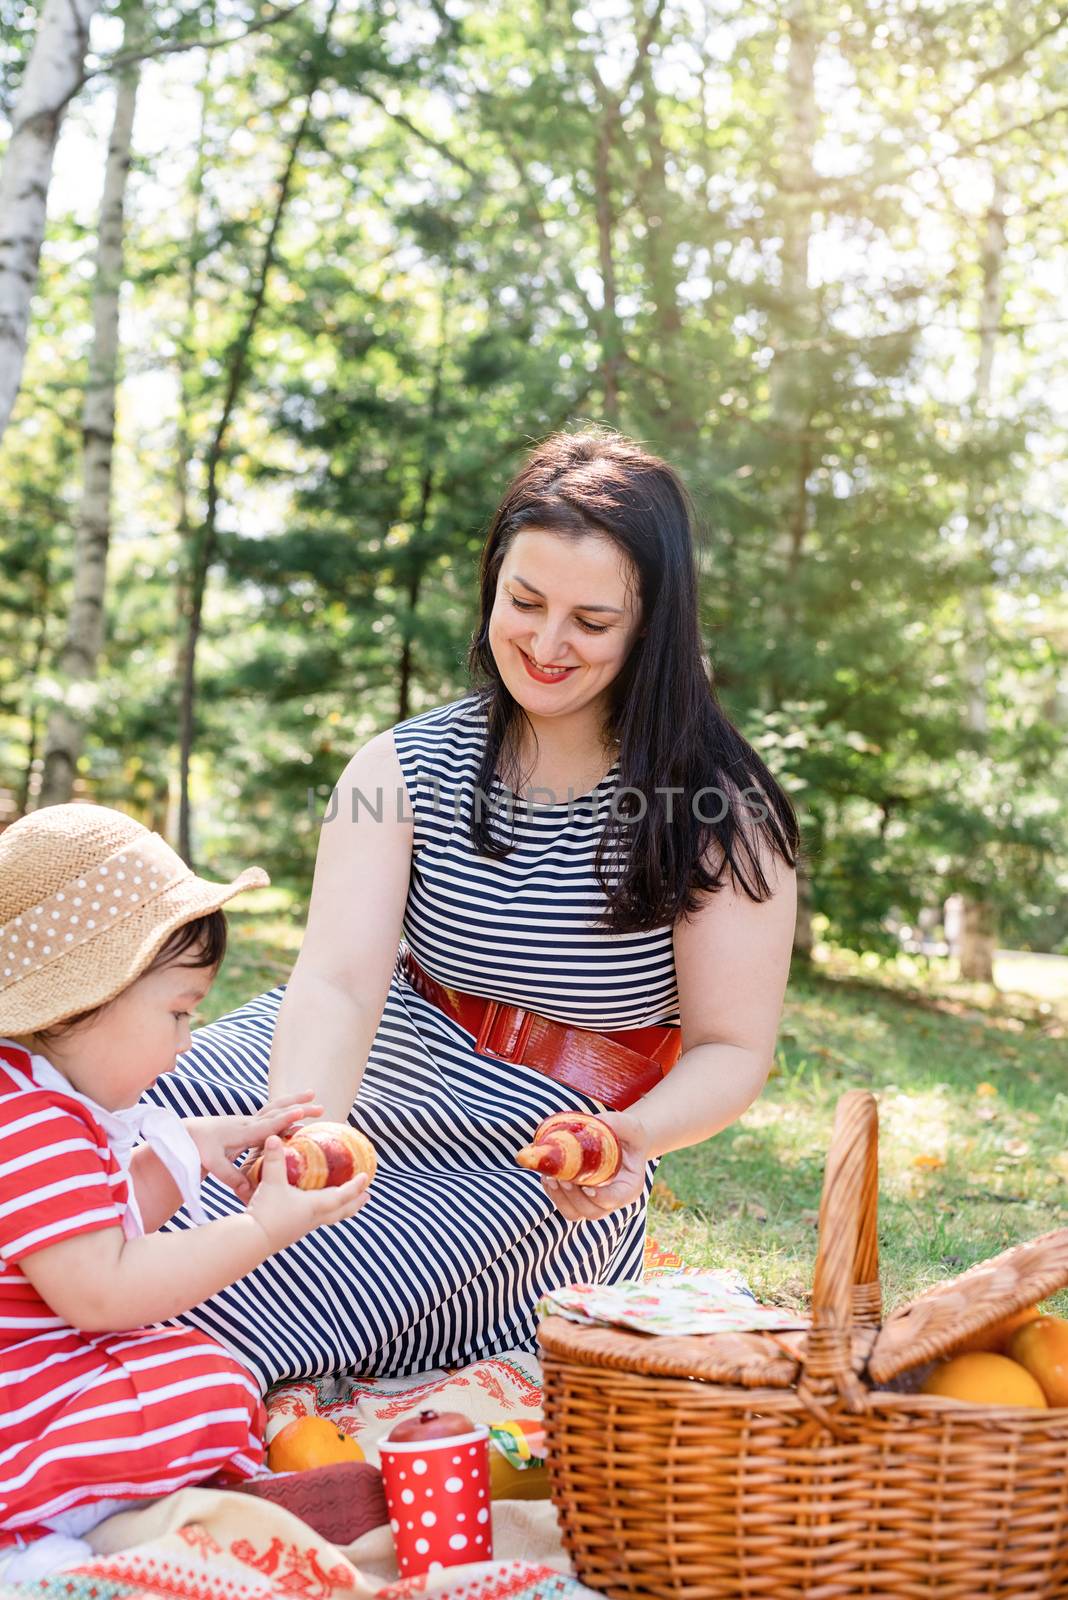 Parks and recreation. Interracial family. Interracial family of mother and daughter in the park having a picnic. Selective focus